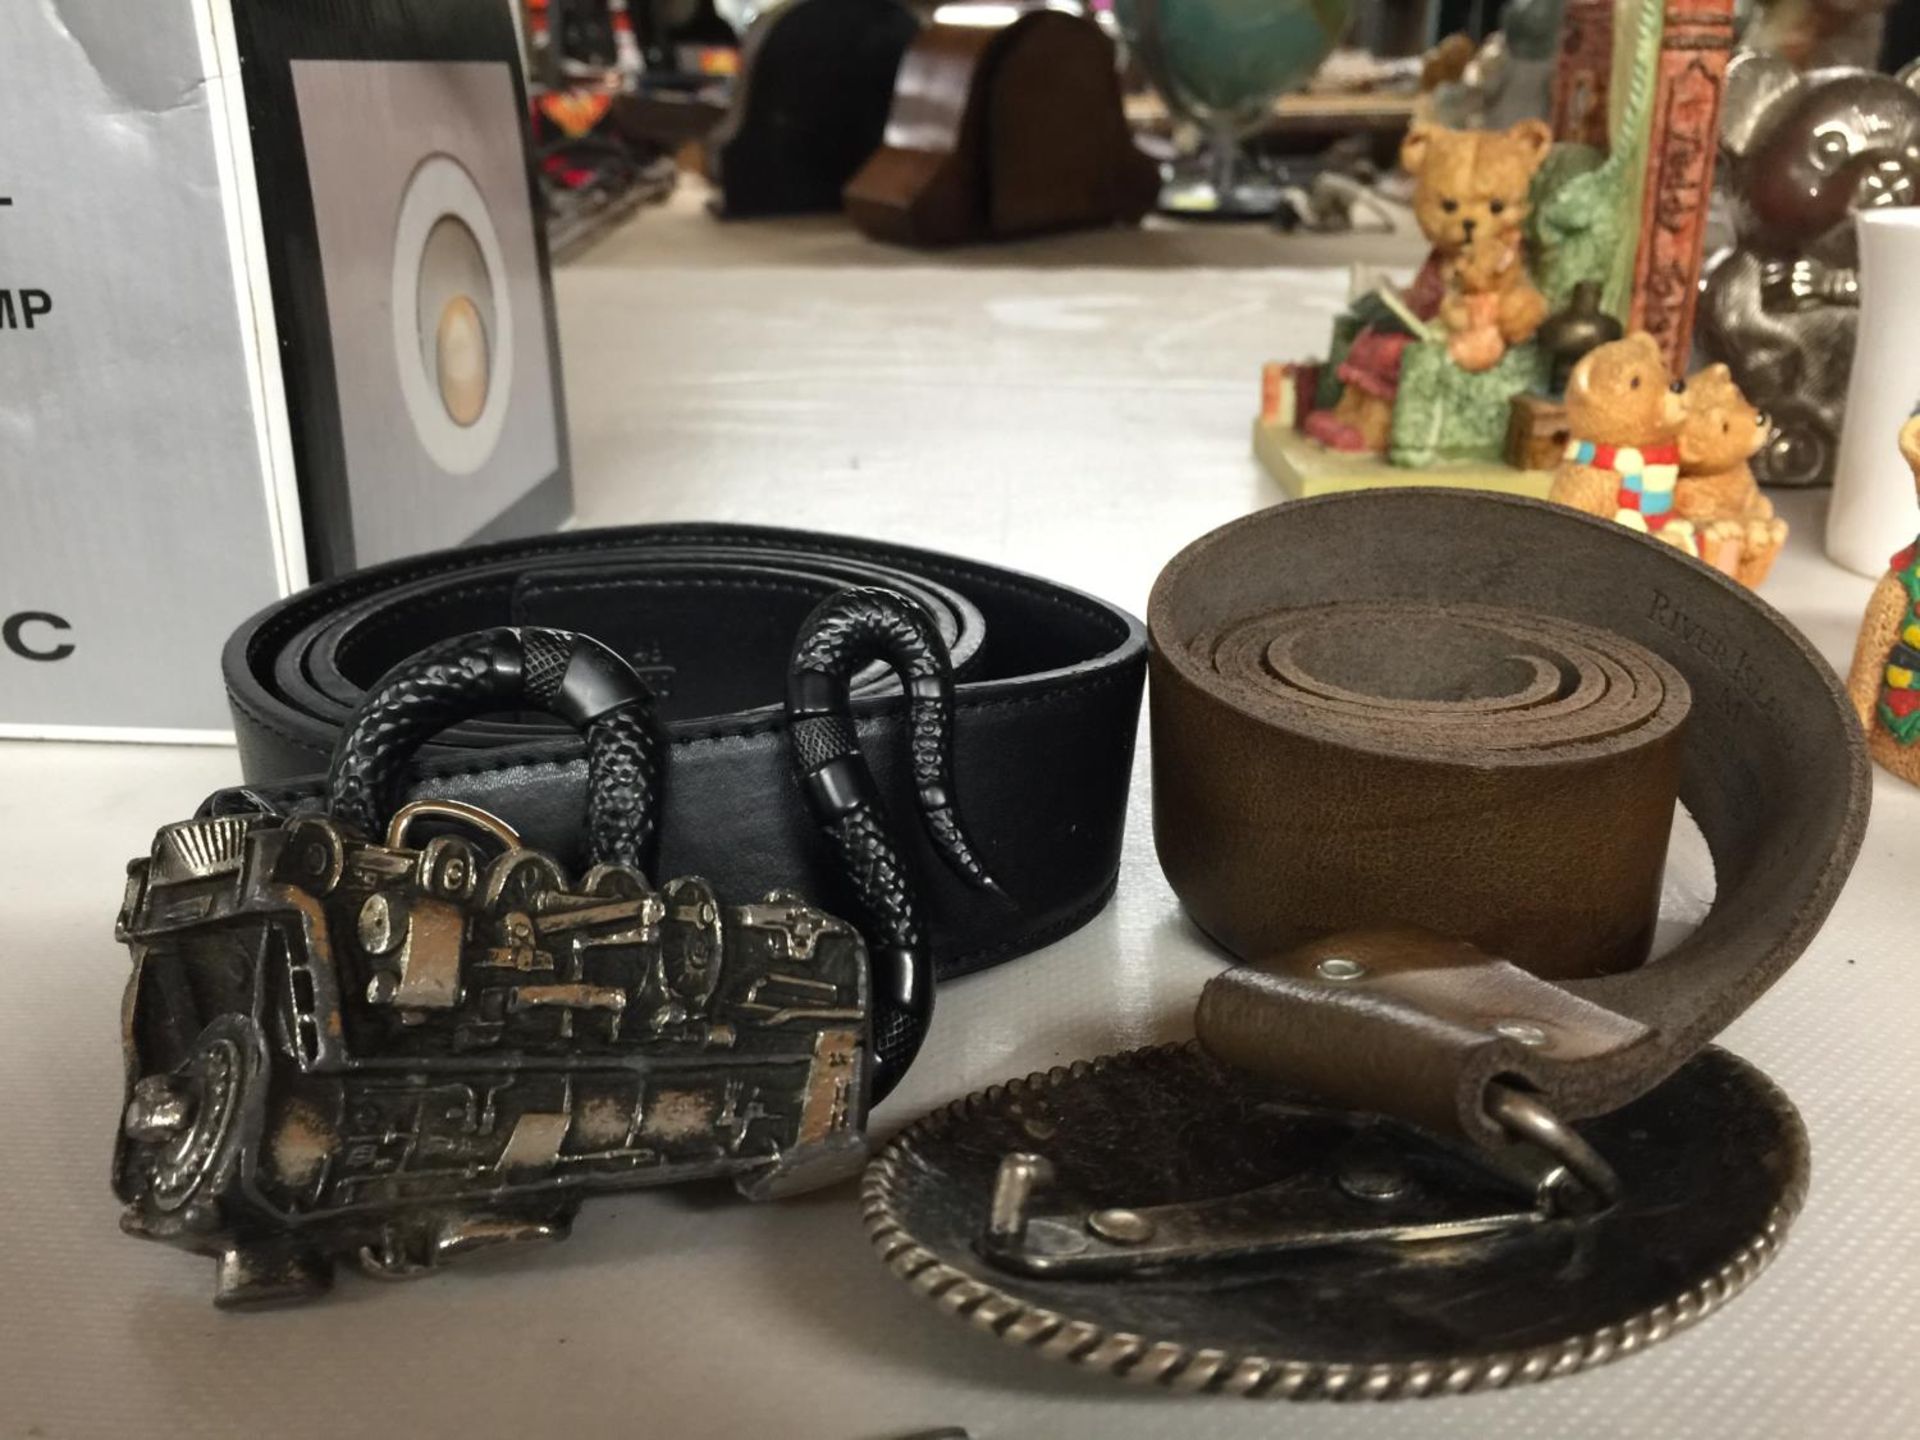 TWO LEATHER BELTS WITH DECORATIVE BUCKLES TO INCLUDE A HORSE AND A SNAKE - Image 2 of 3